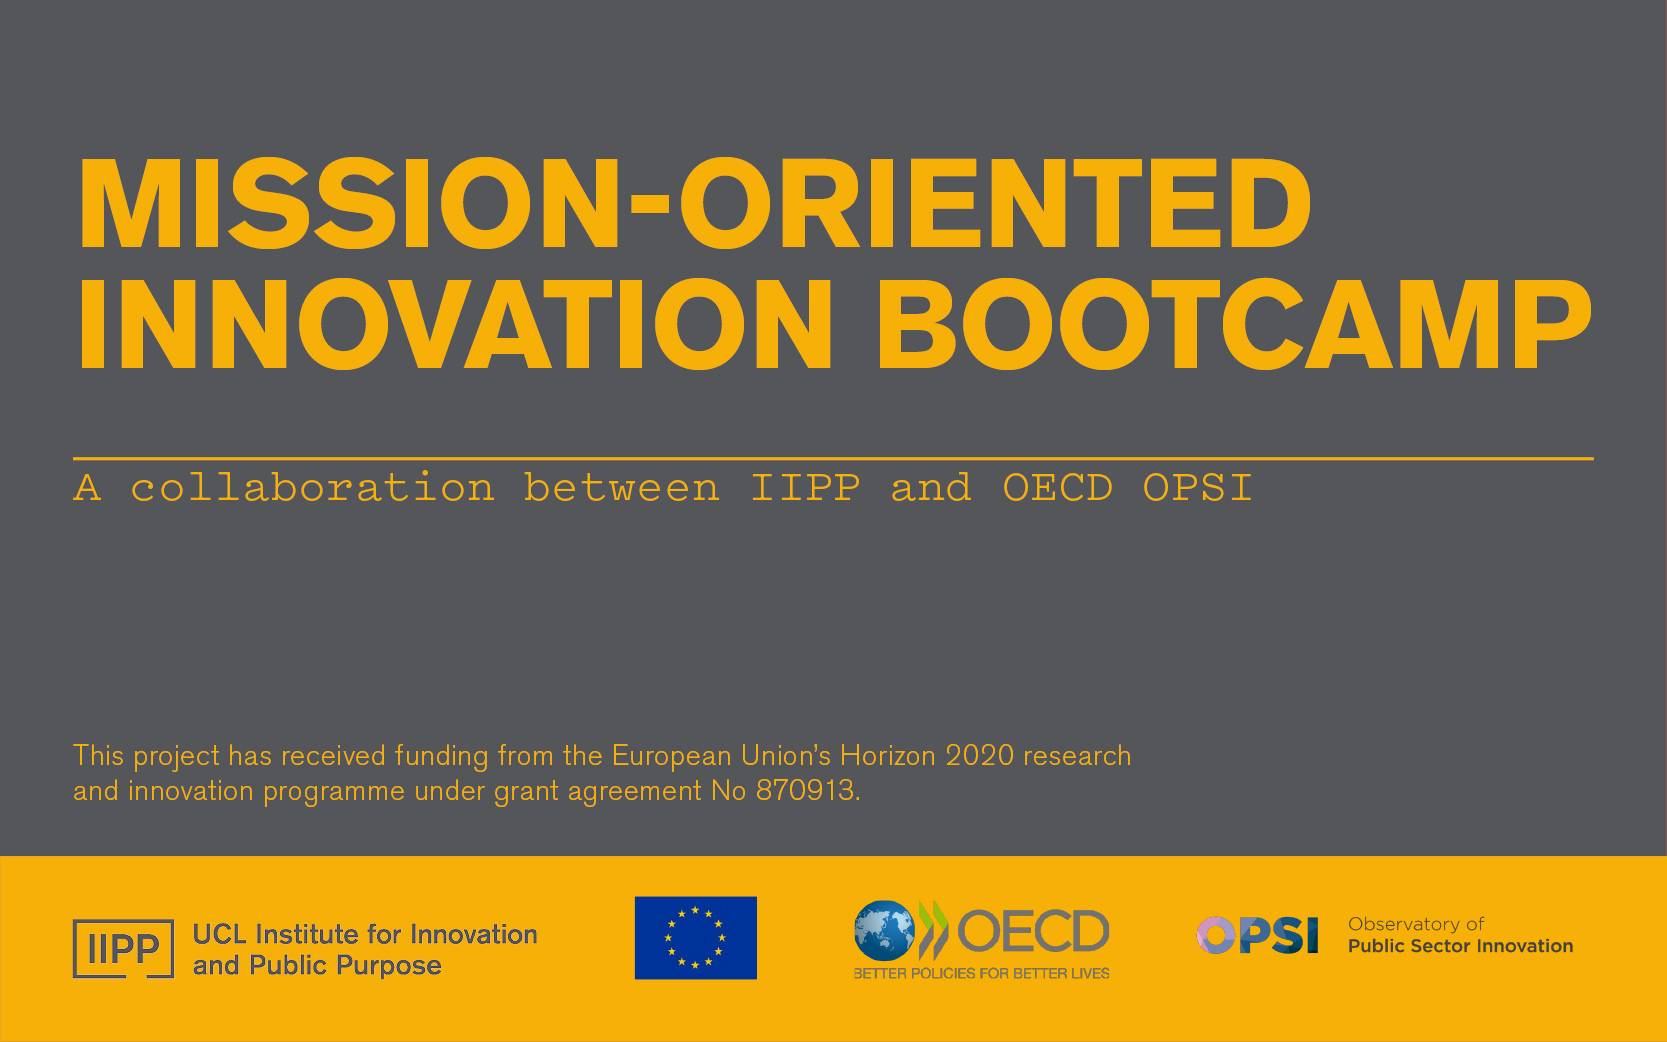 Mission-oriented innovation bootcamp